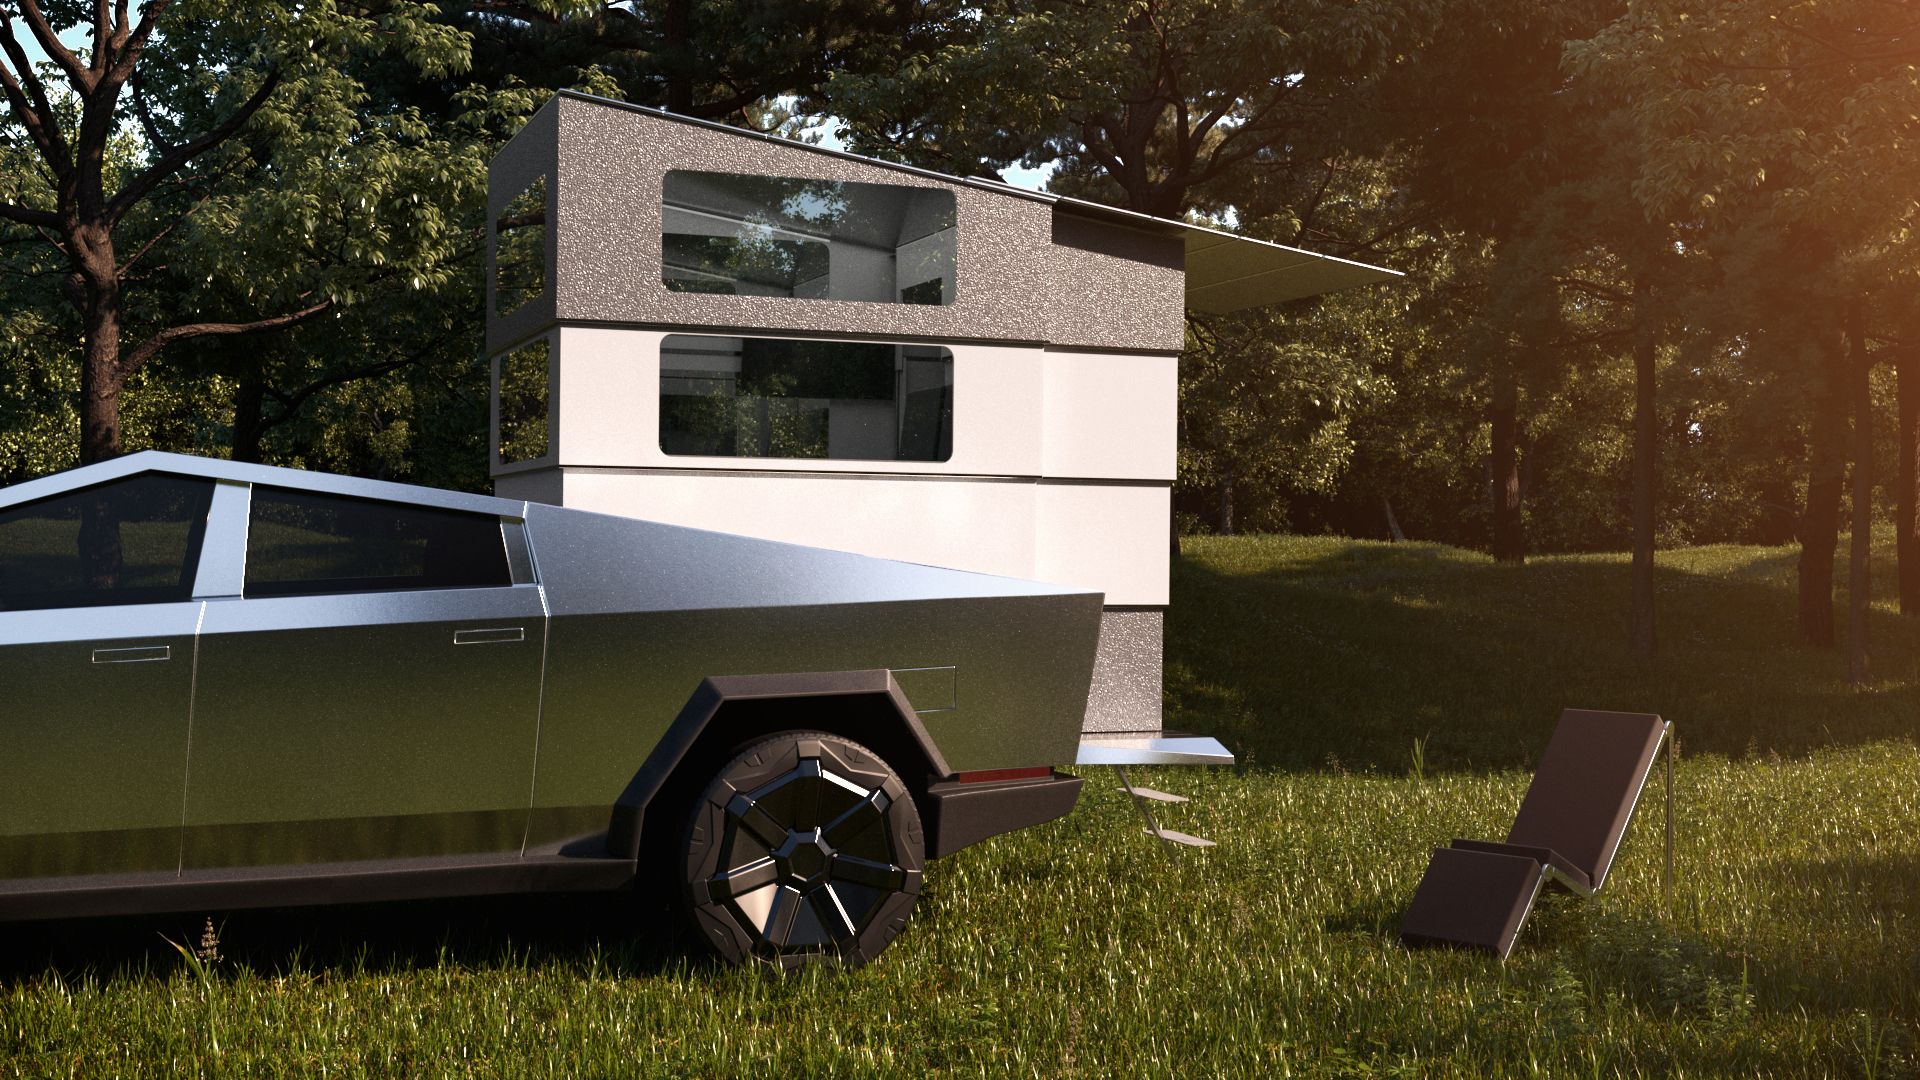 Computer-generated image of a Cyberlandr pop-up camper in the bed of a Tesla Cyber truck. 